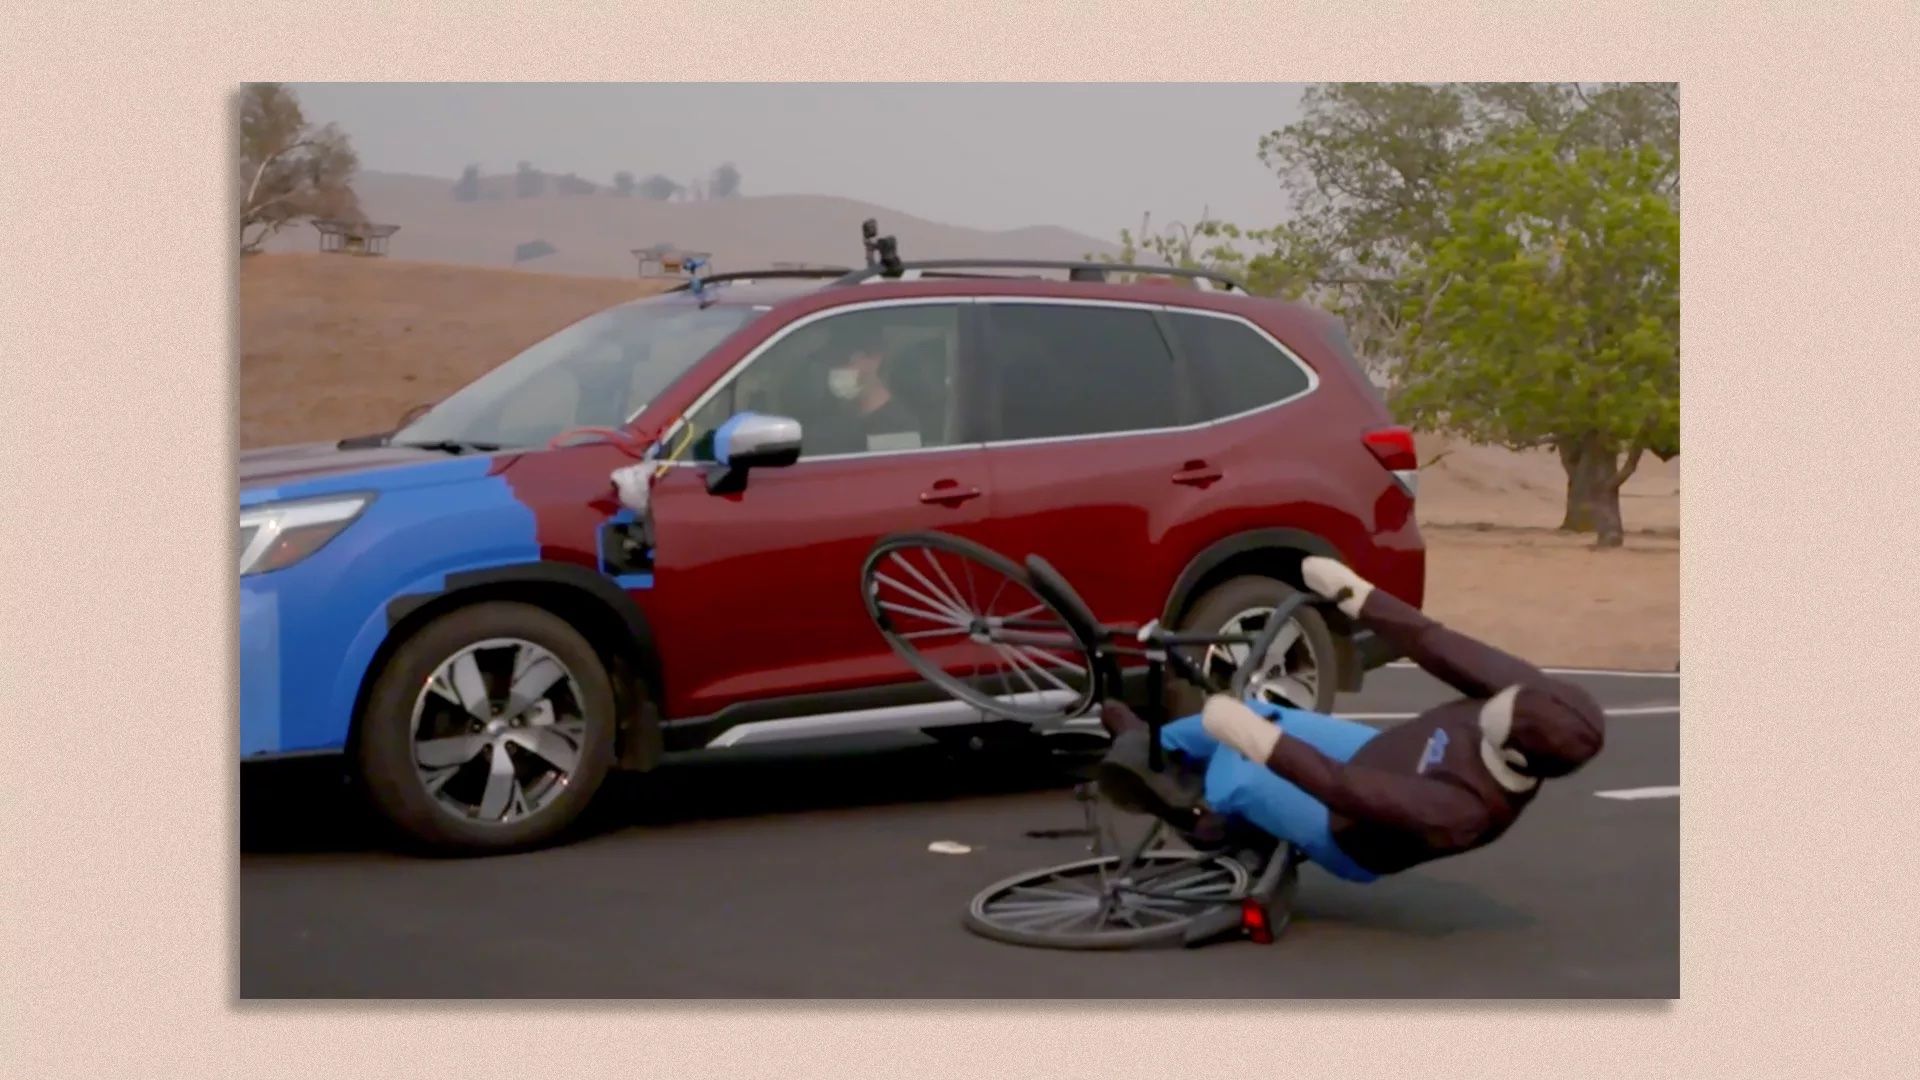 A crash test dummy on a bike getting knocked over by an automated car